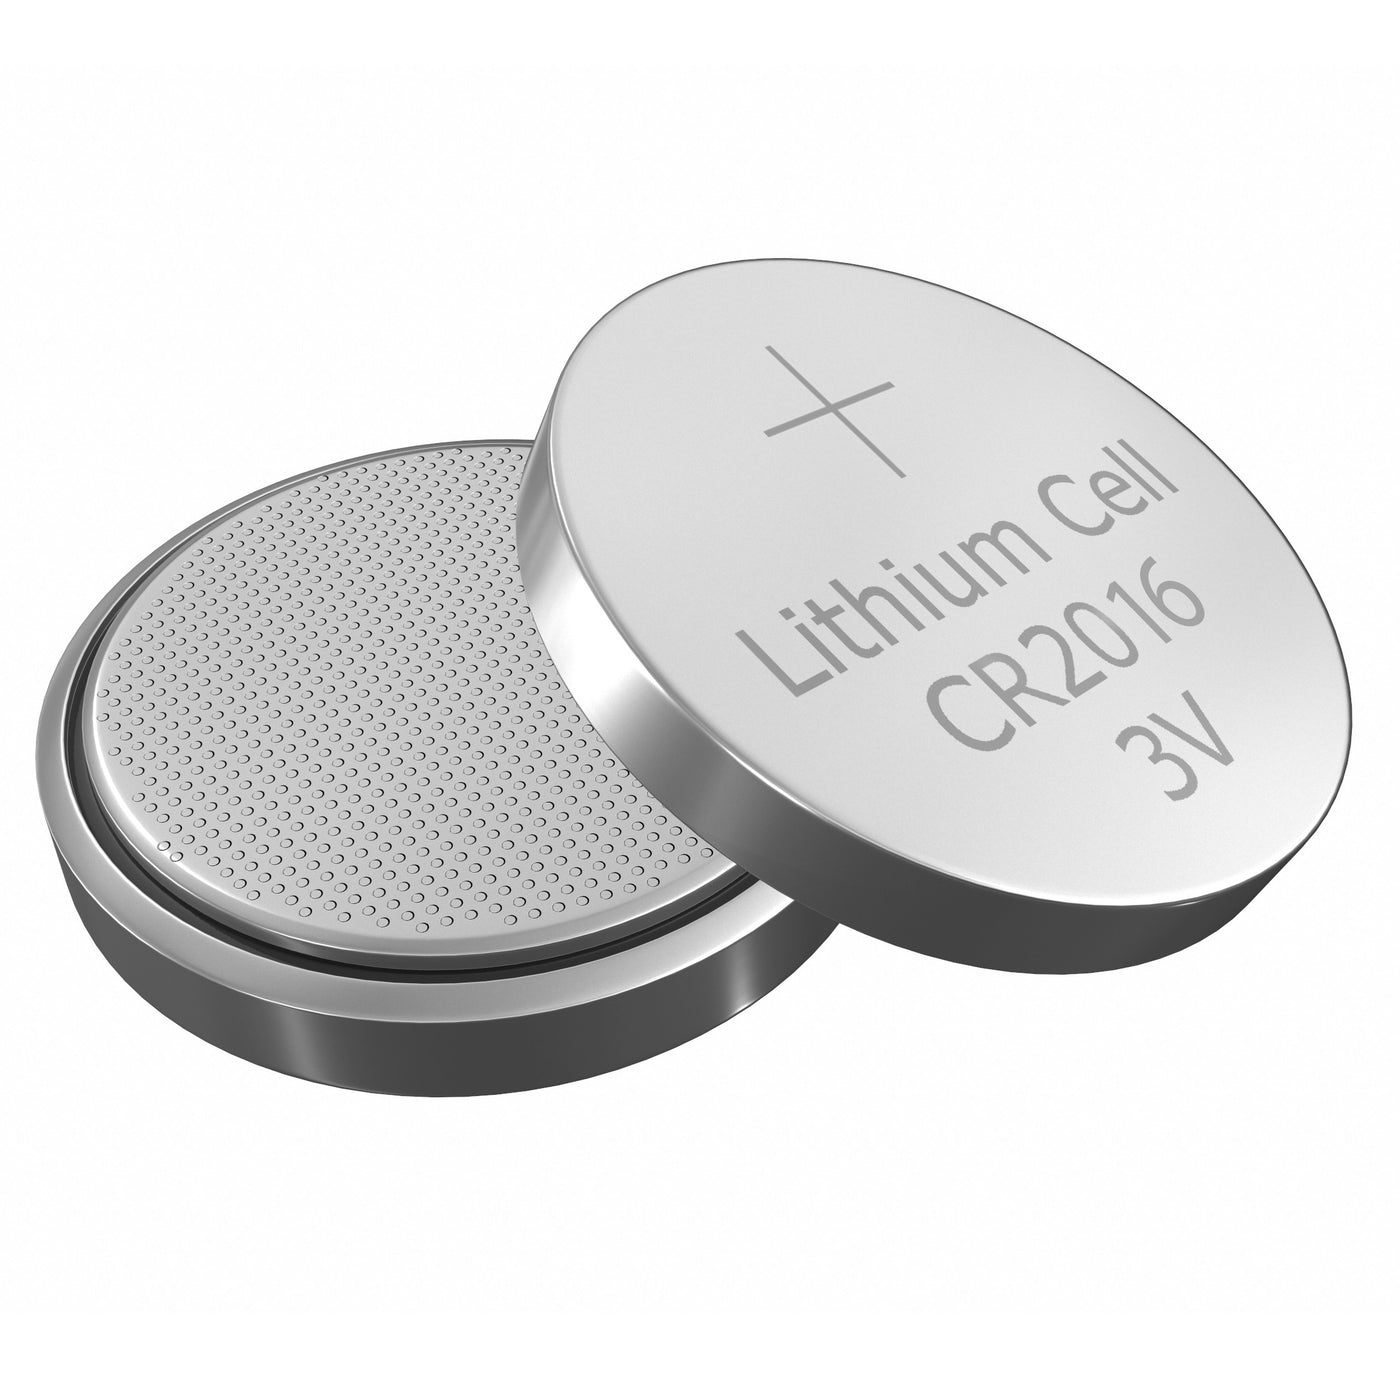 P001964 - Lithium button cell battery CR2016 3V